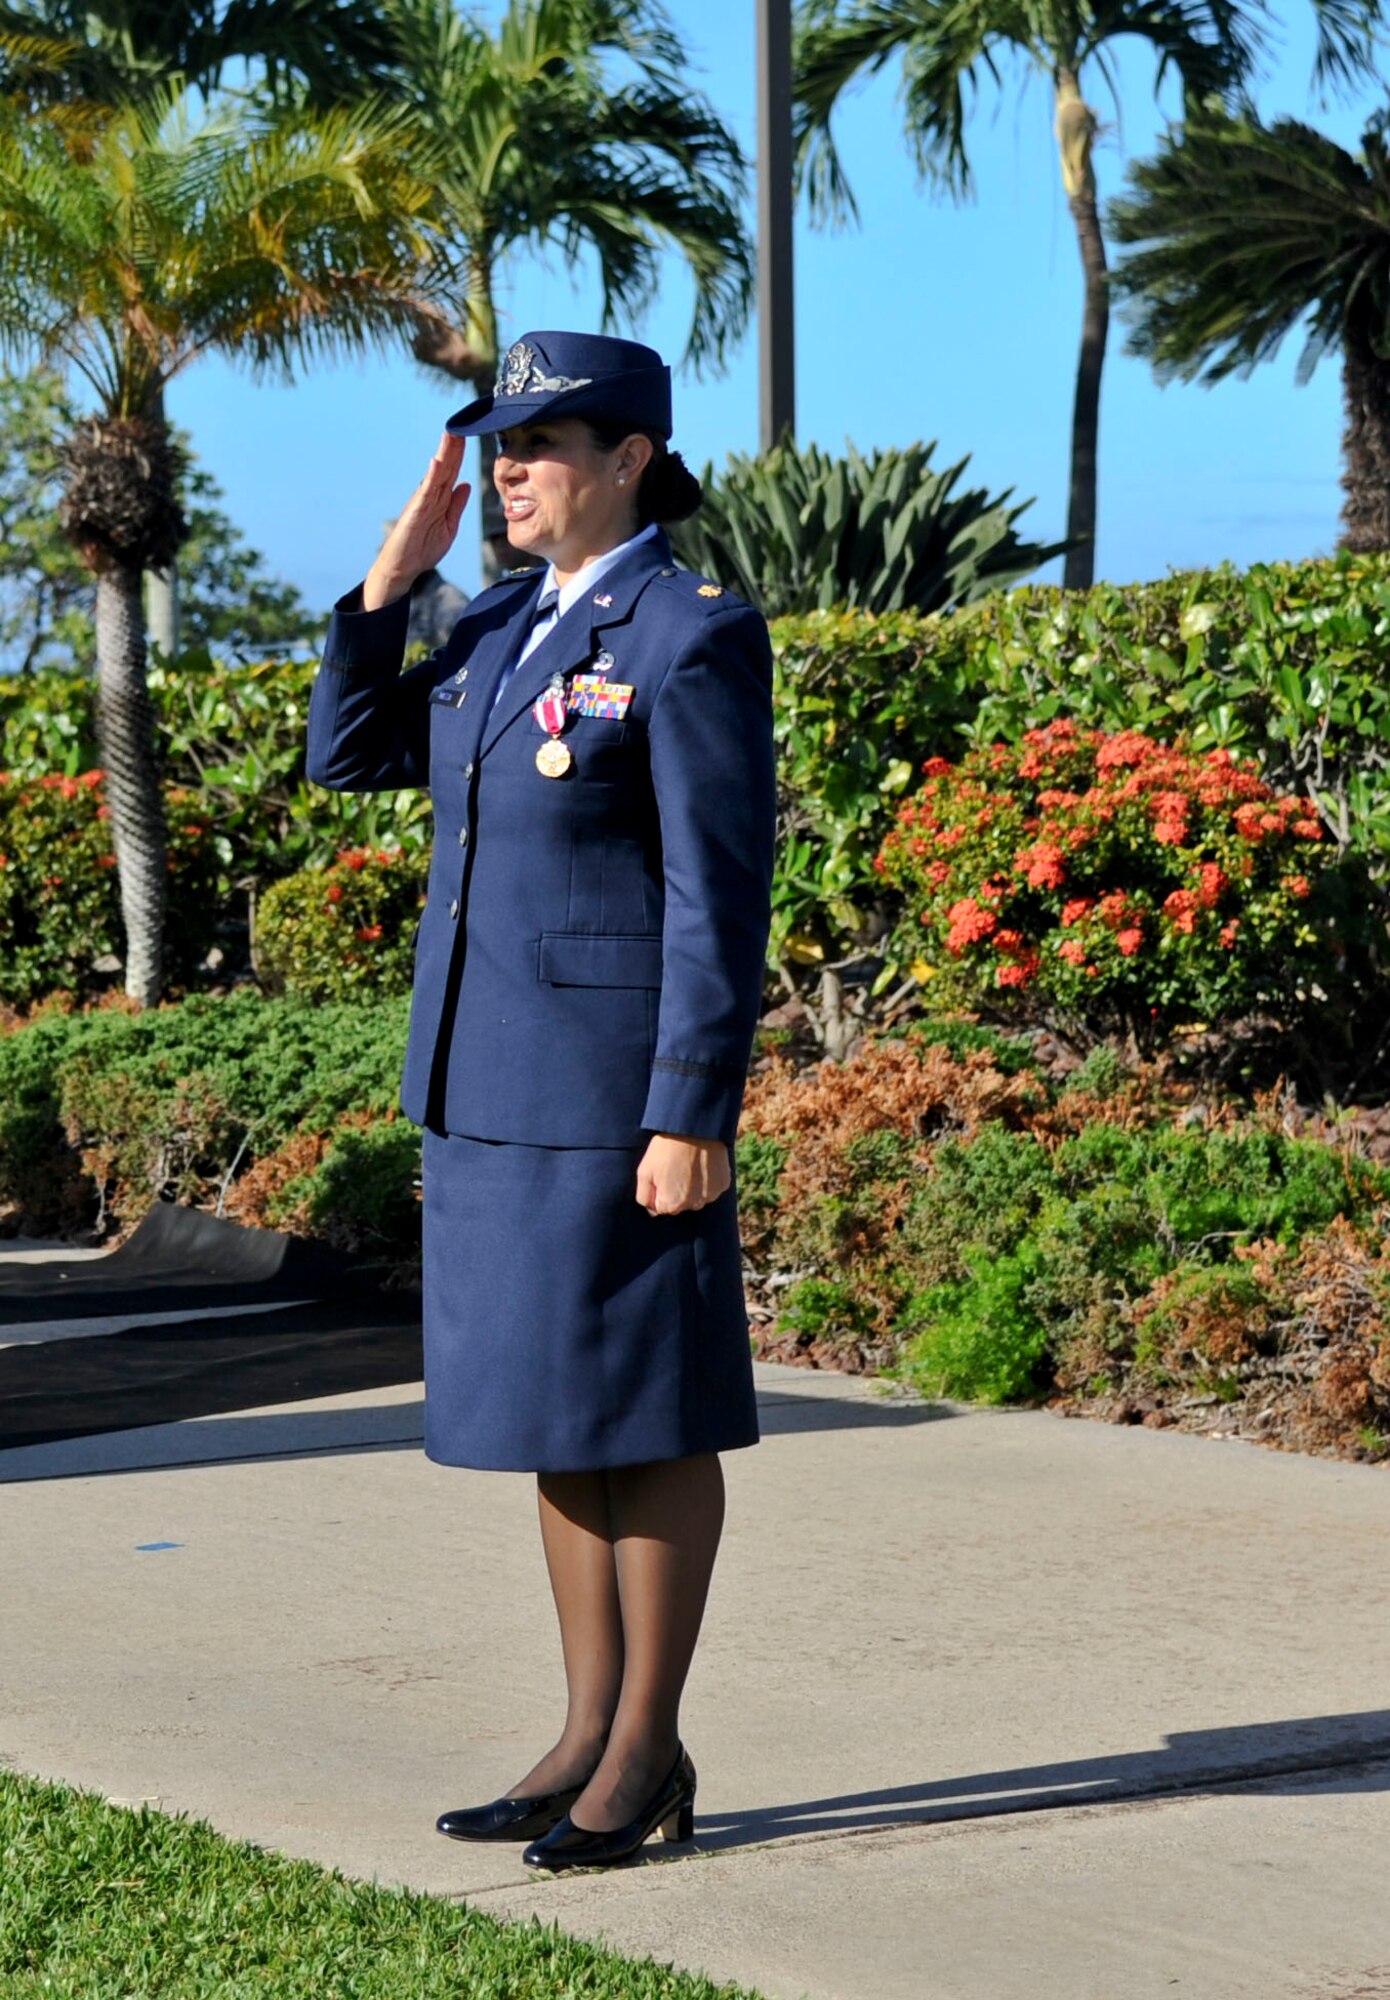 Maj. Dorinda Mazza, outgoing 15th Comptroller Squadron commander, renders one final salute before handing over command of the squadron to Maj. Andrew Gmytrasiewicz in a change-of-command ceremony at the Missing Man Formation June 10, 2016, on Joint Base Pearl Harbor-Hickam, Hawaii. (U.S. Air Force photo by Tech. Sgt. Terri Paden/Released)